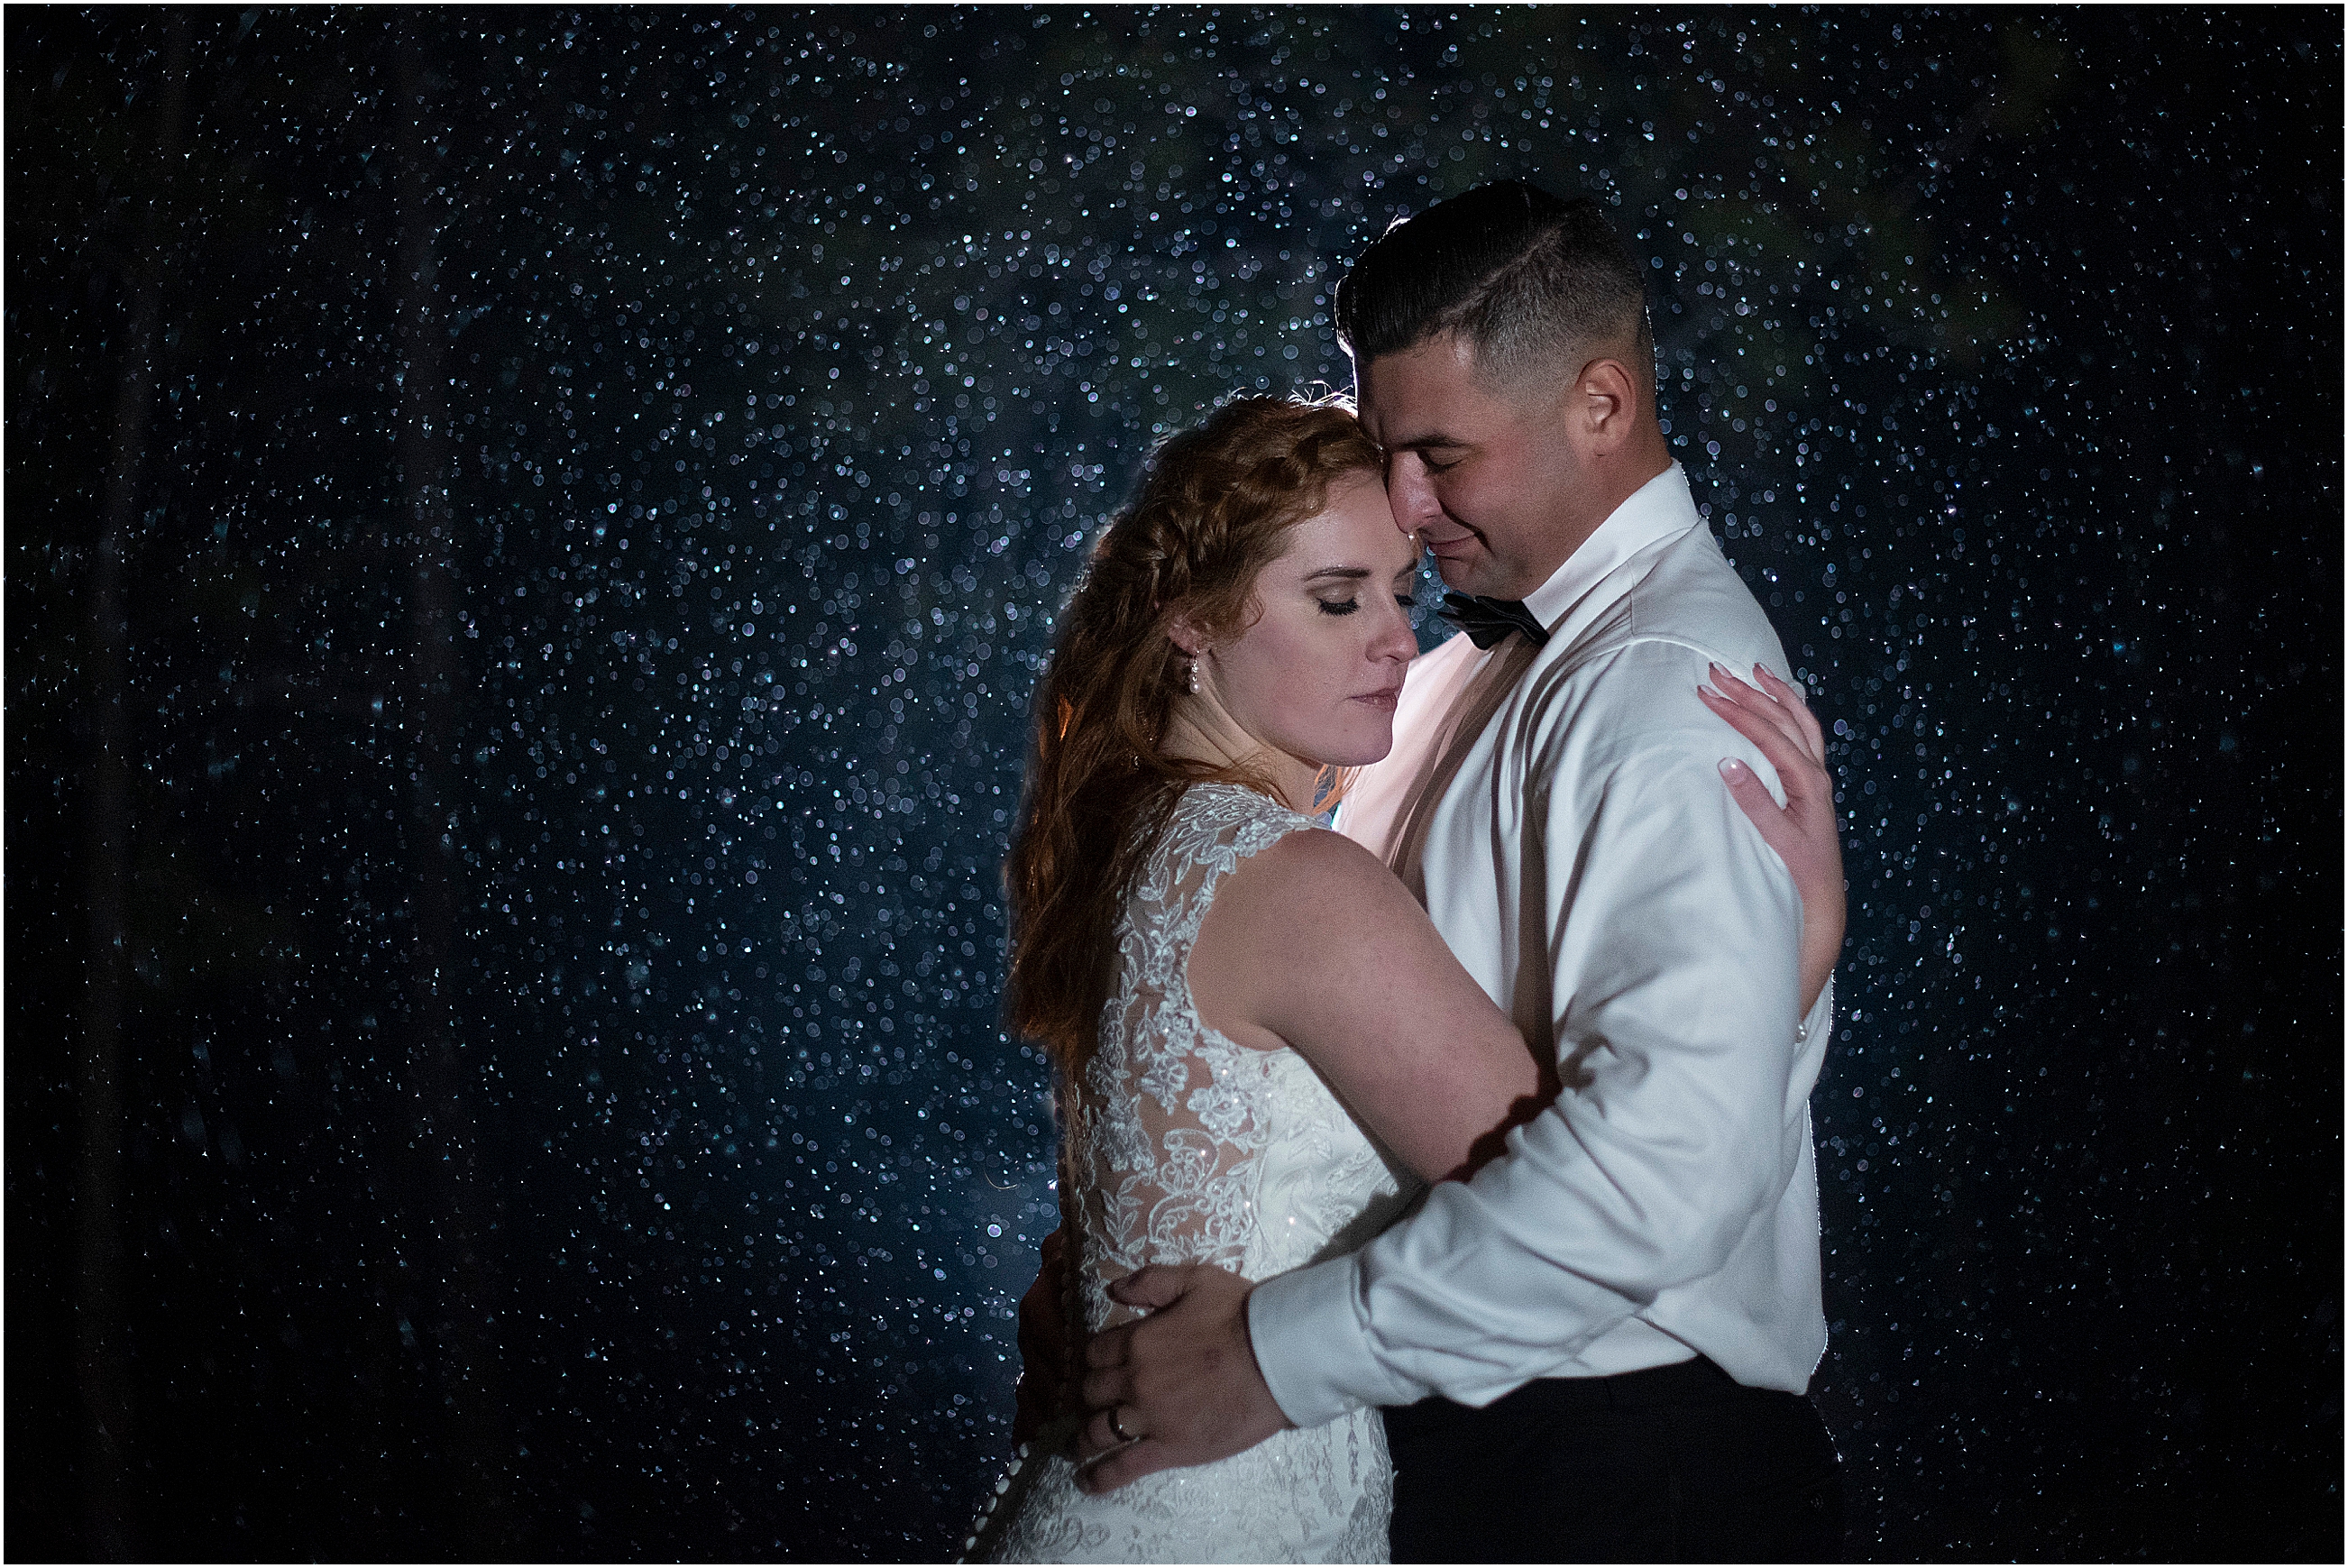 Jeff and Cassidy stand and embrace while the snow falls all around them at night during their winter wedding in black forest, colorado